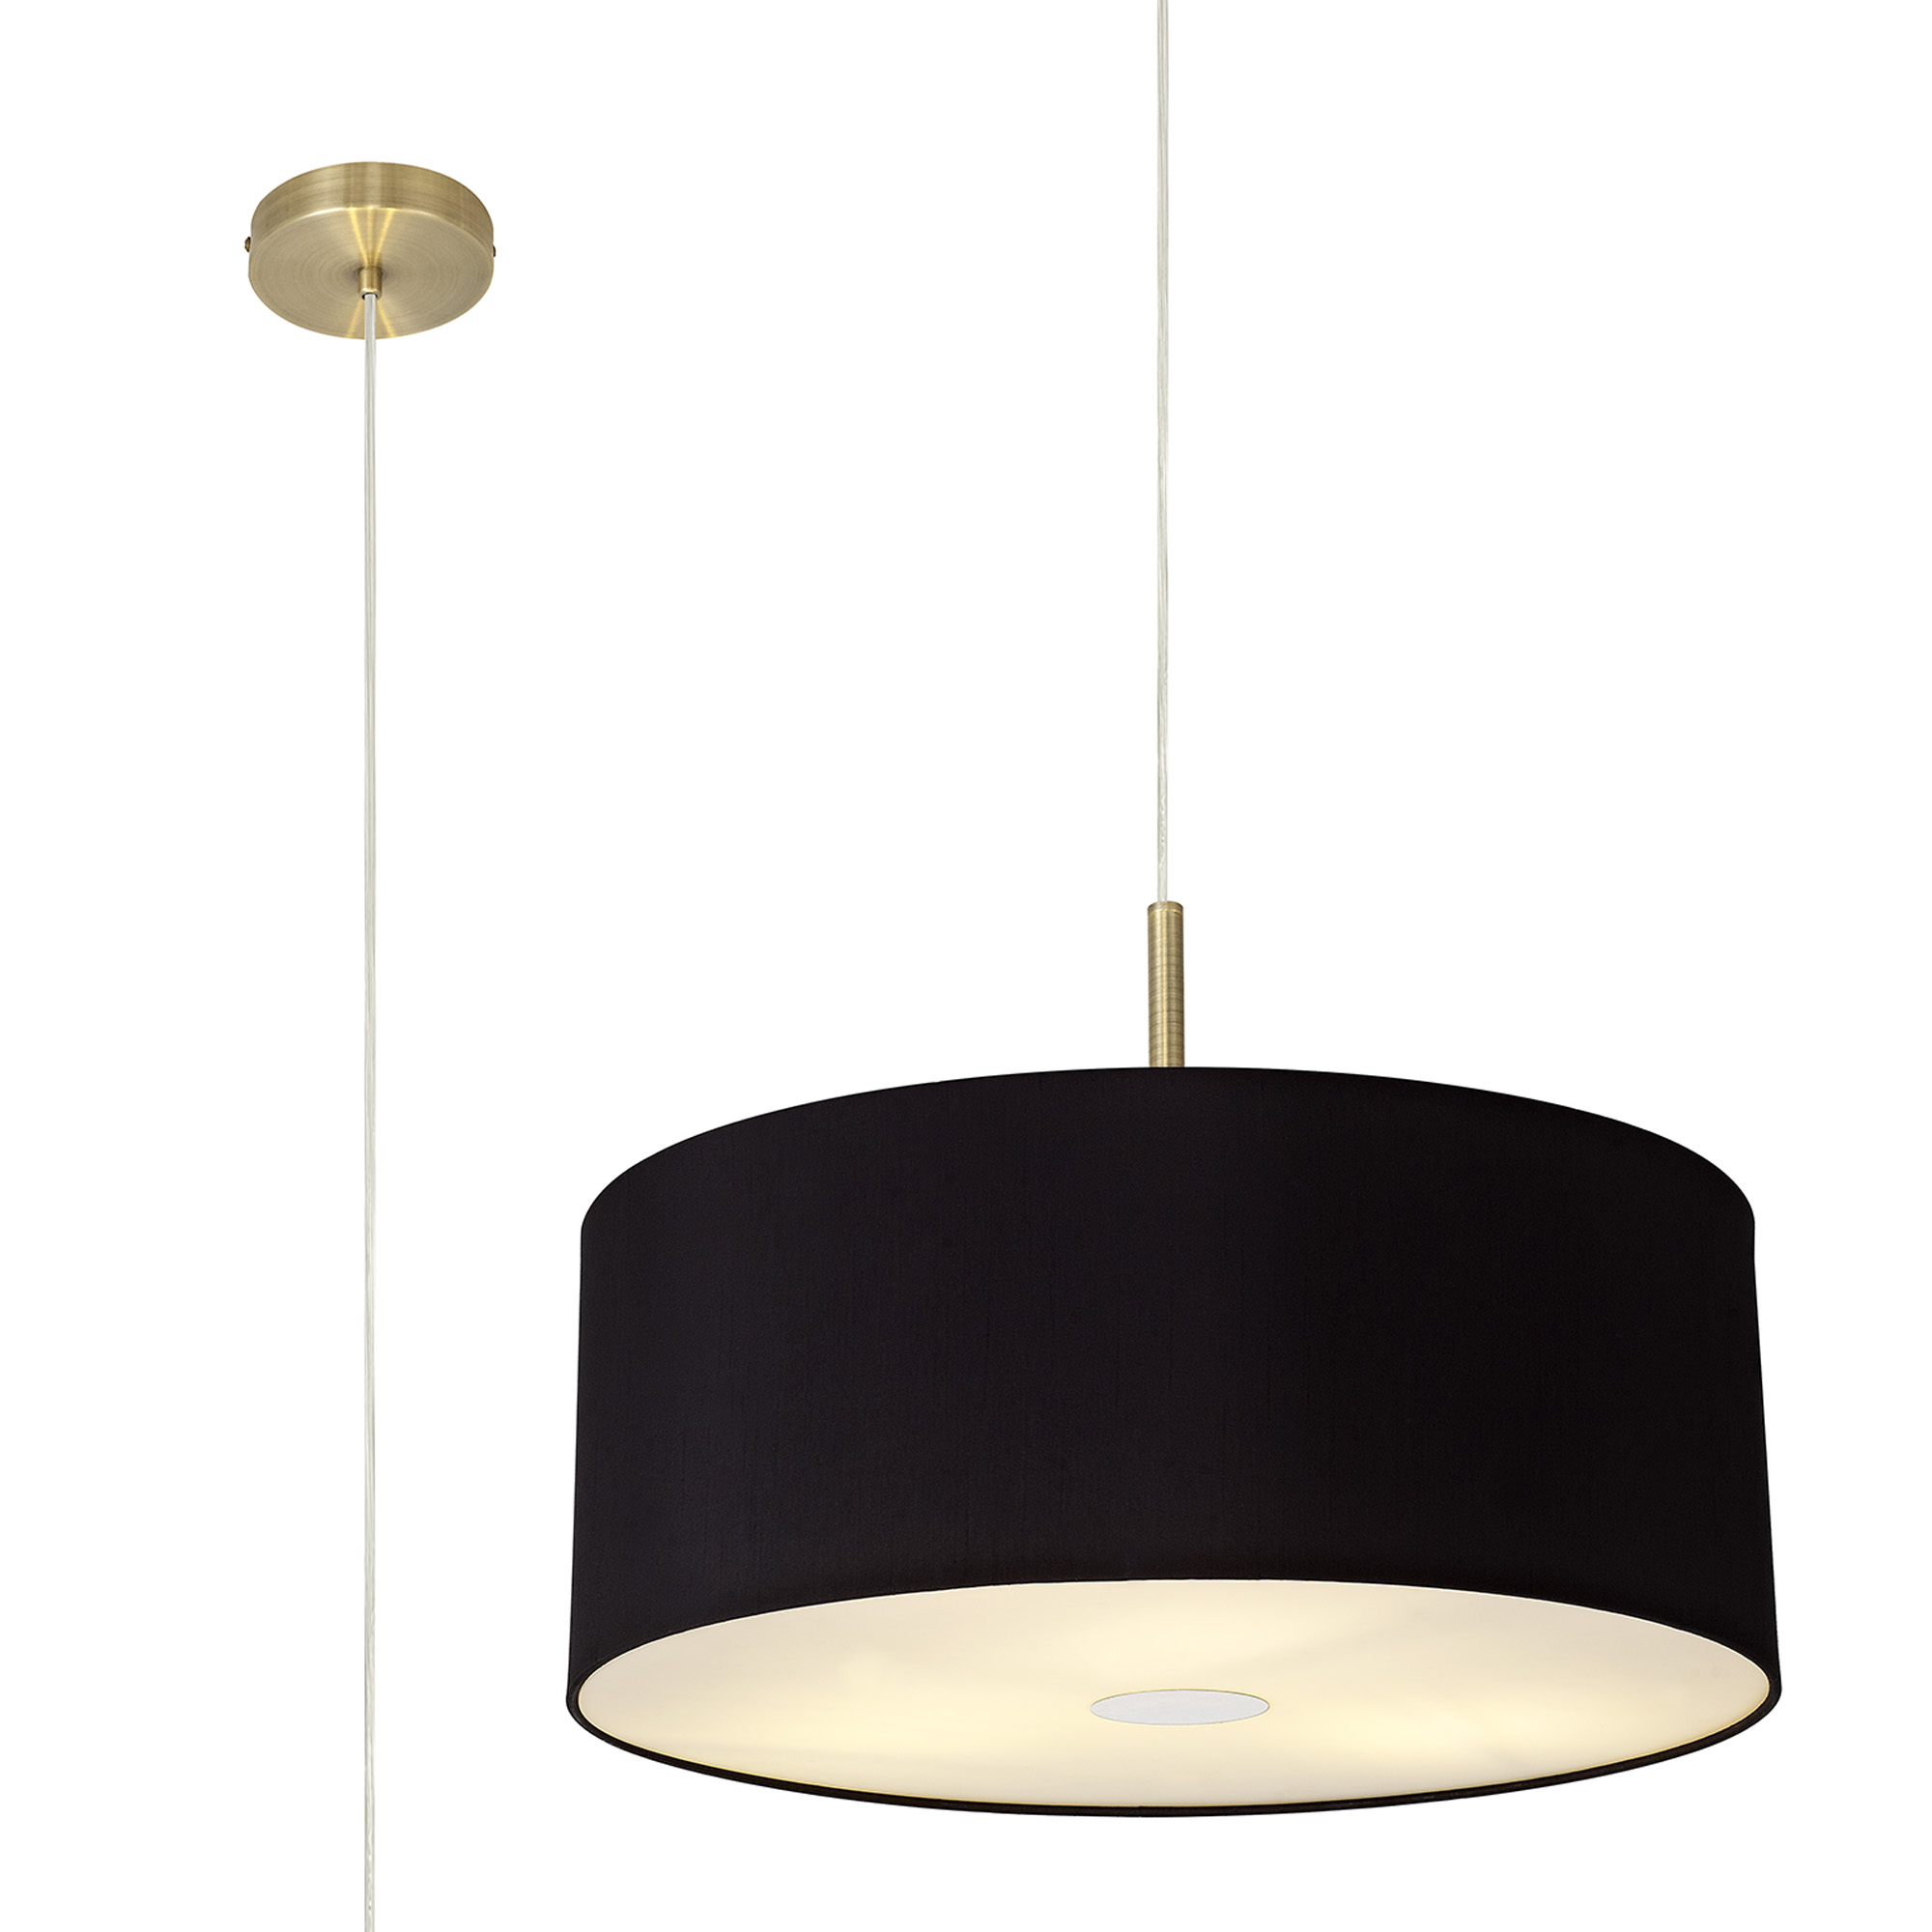 DK0407  Baymont 50cm 3 Light Pendant Antique Brass, Midnight Black/Green Olive, Frosted Diffuser